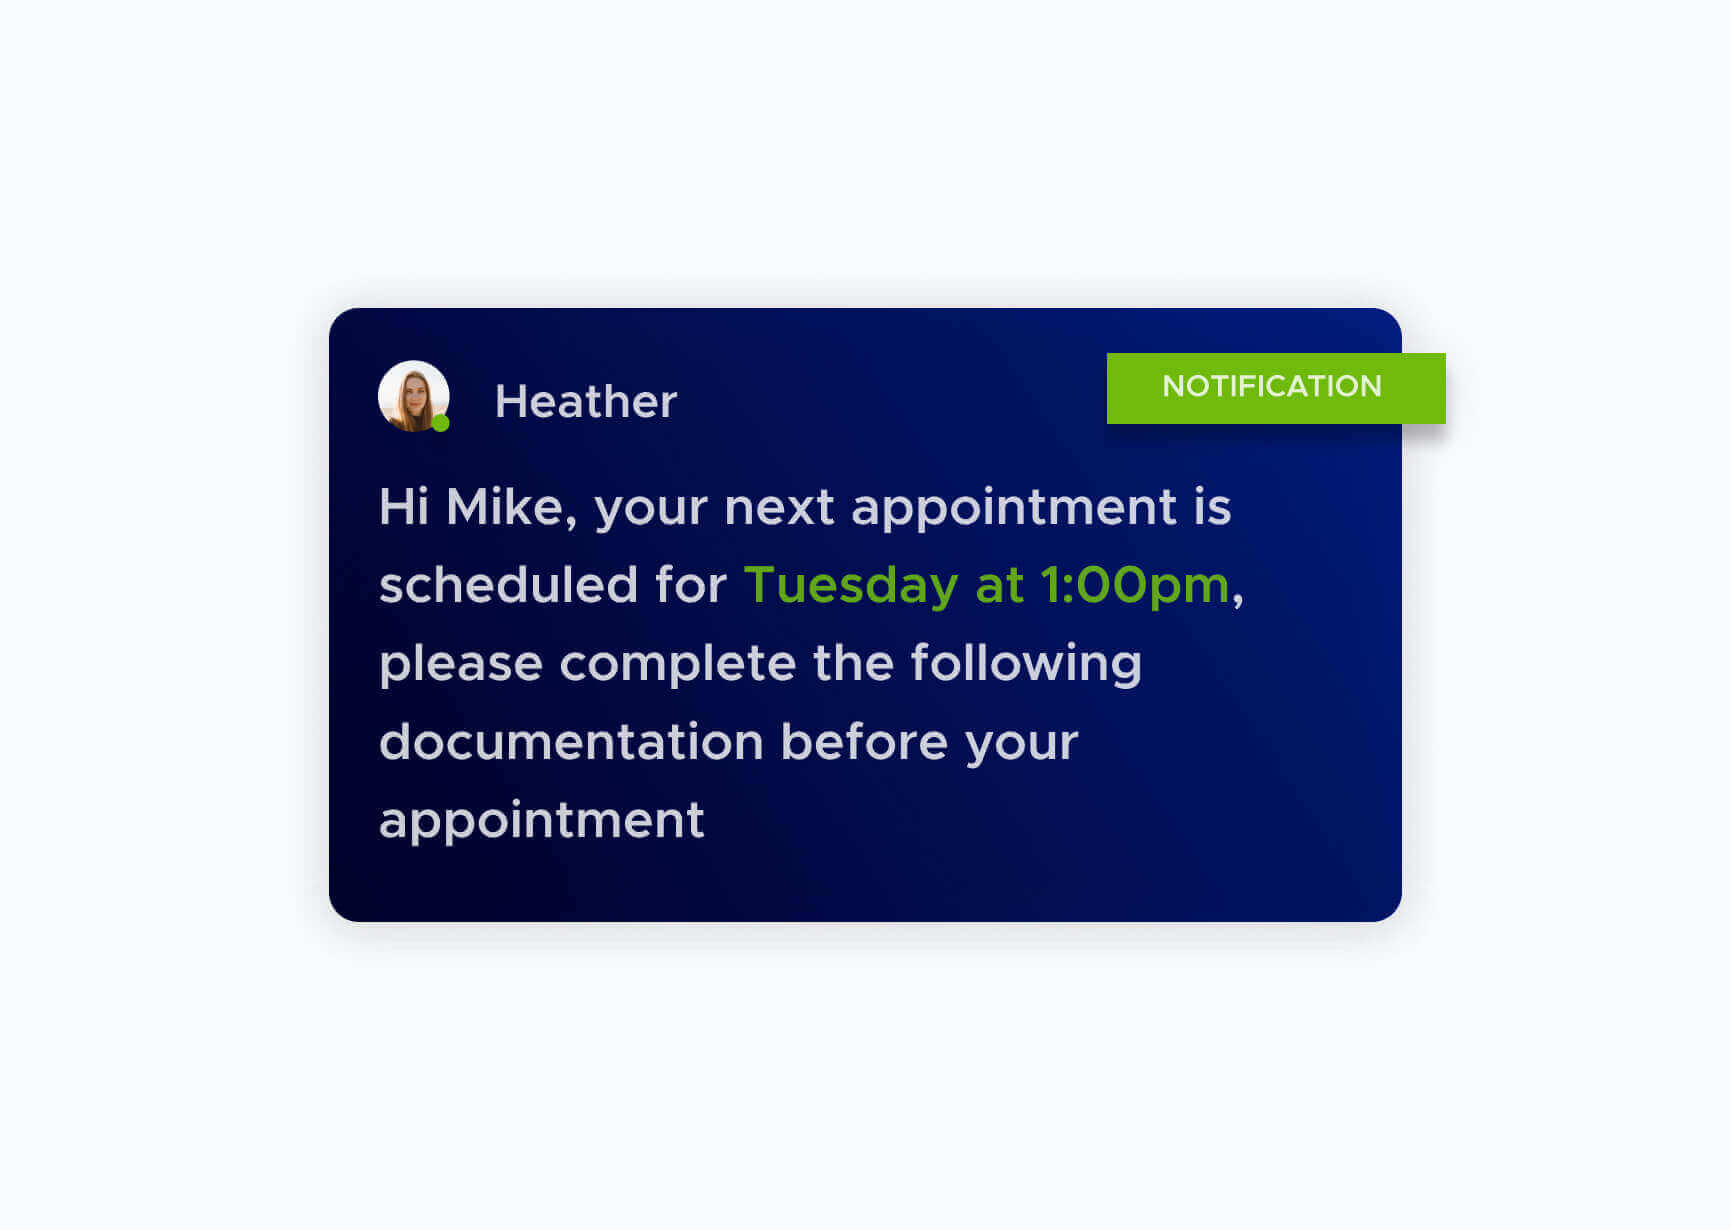 Heather's notification to Mike remembering their appointment ENGB